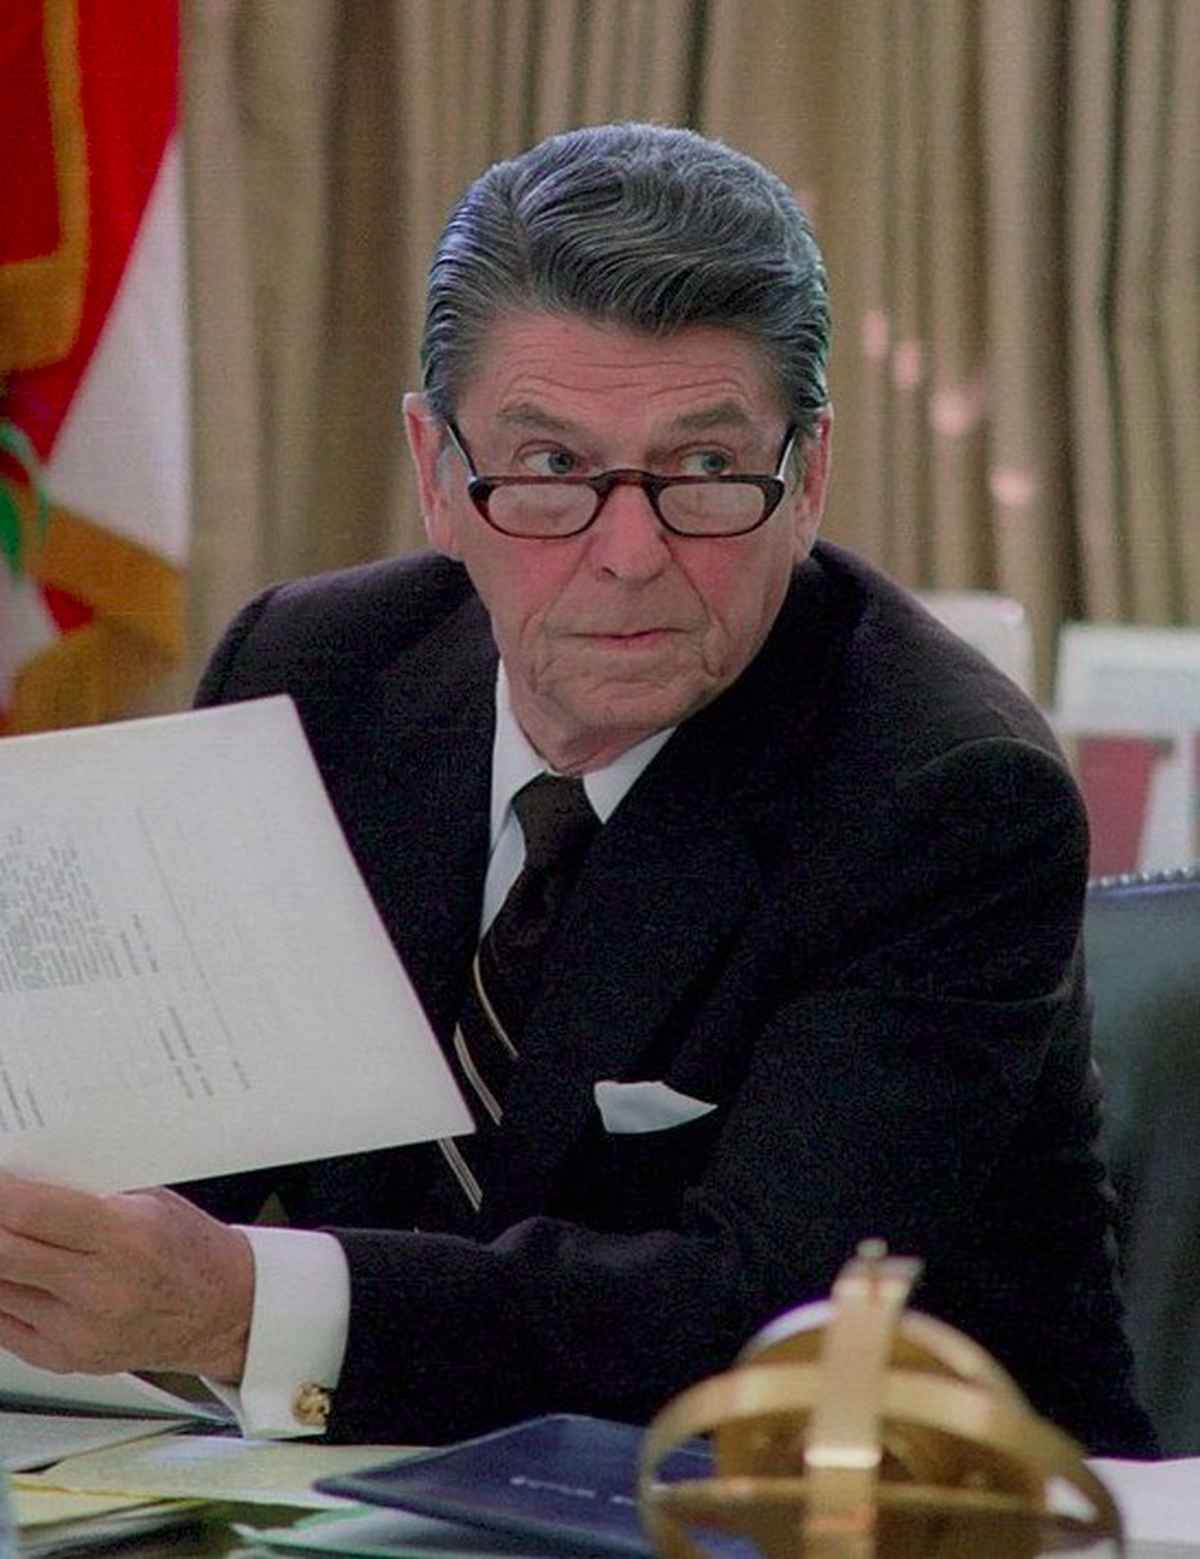 President Ronald Reagan wearing glasses while working at his desk in the oval office